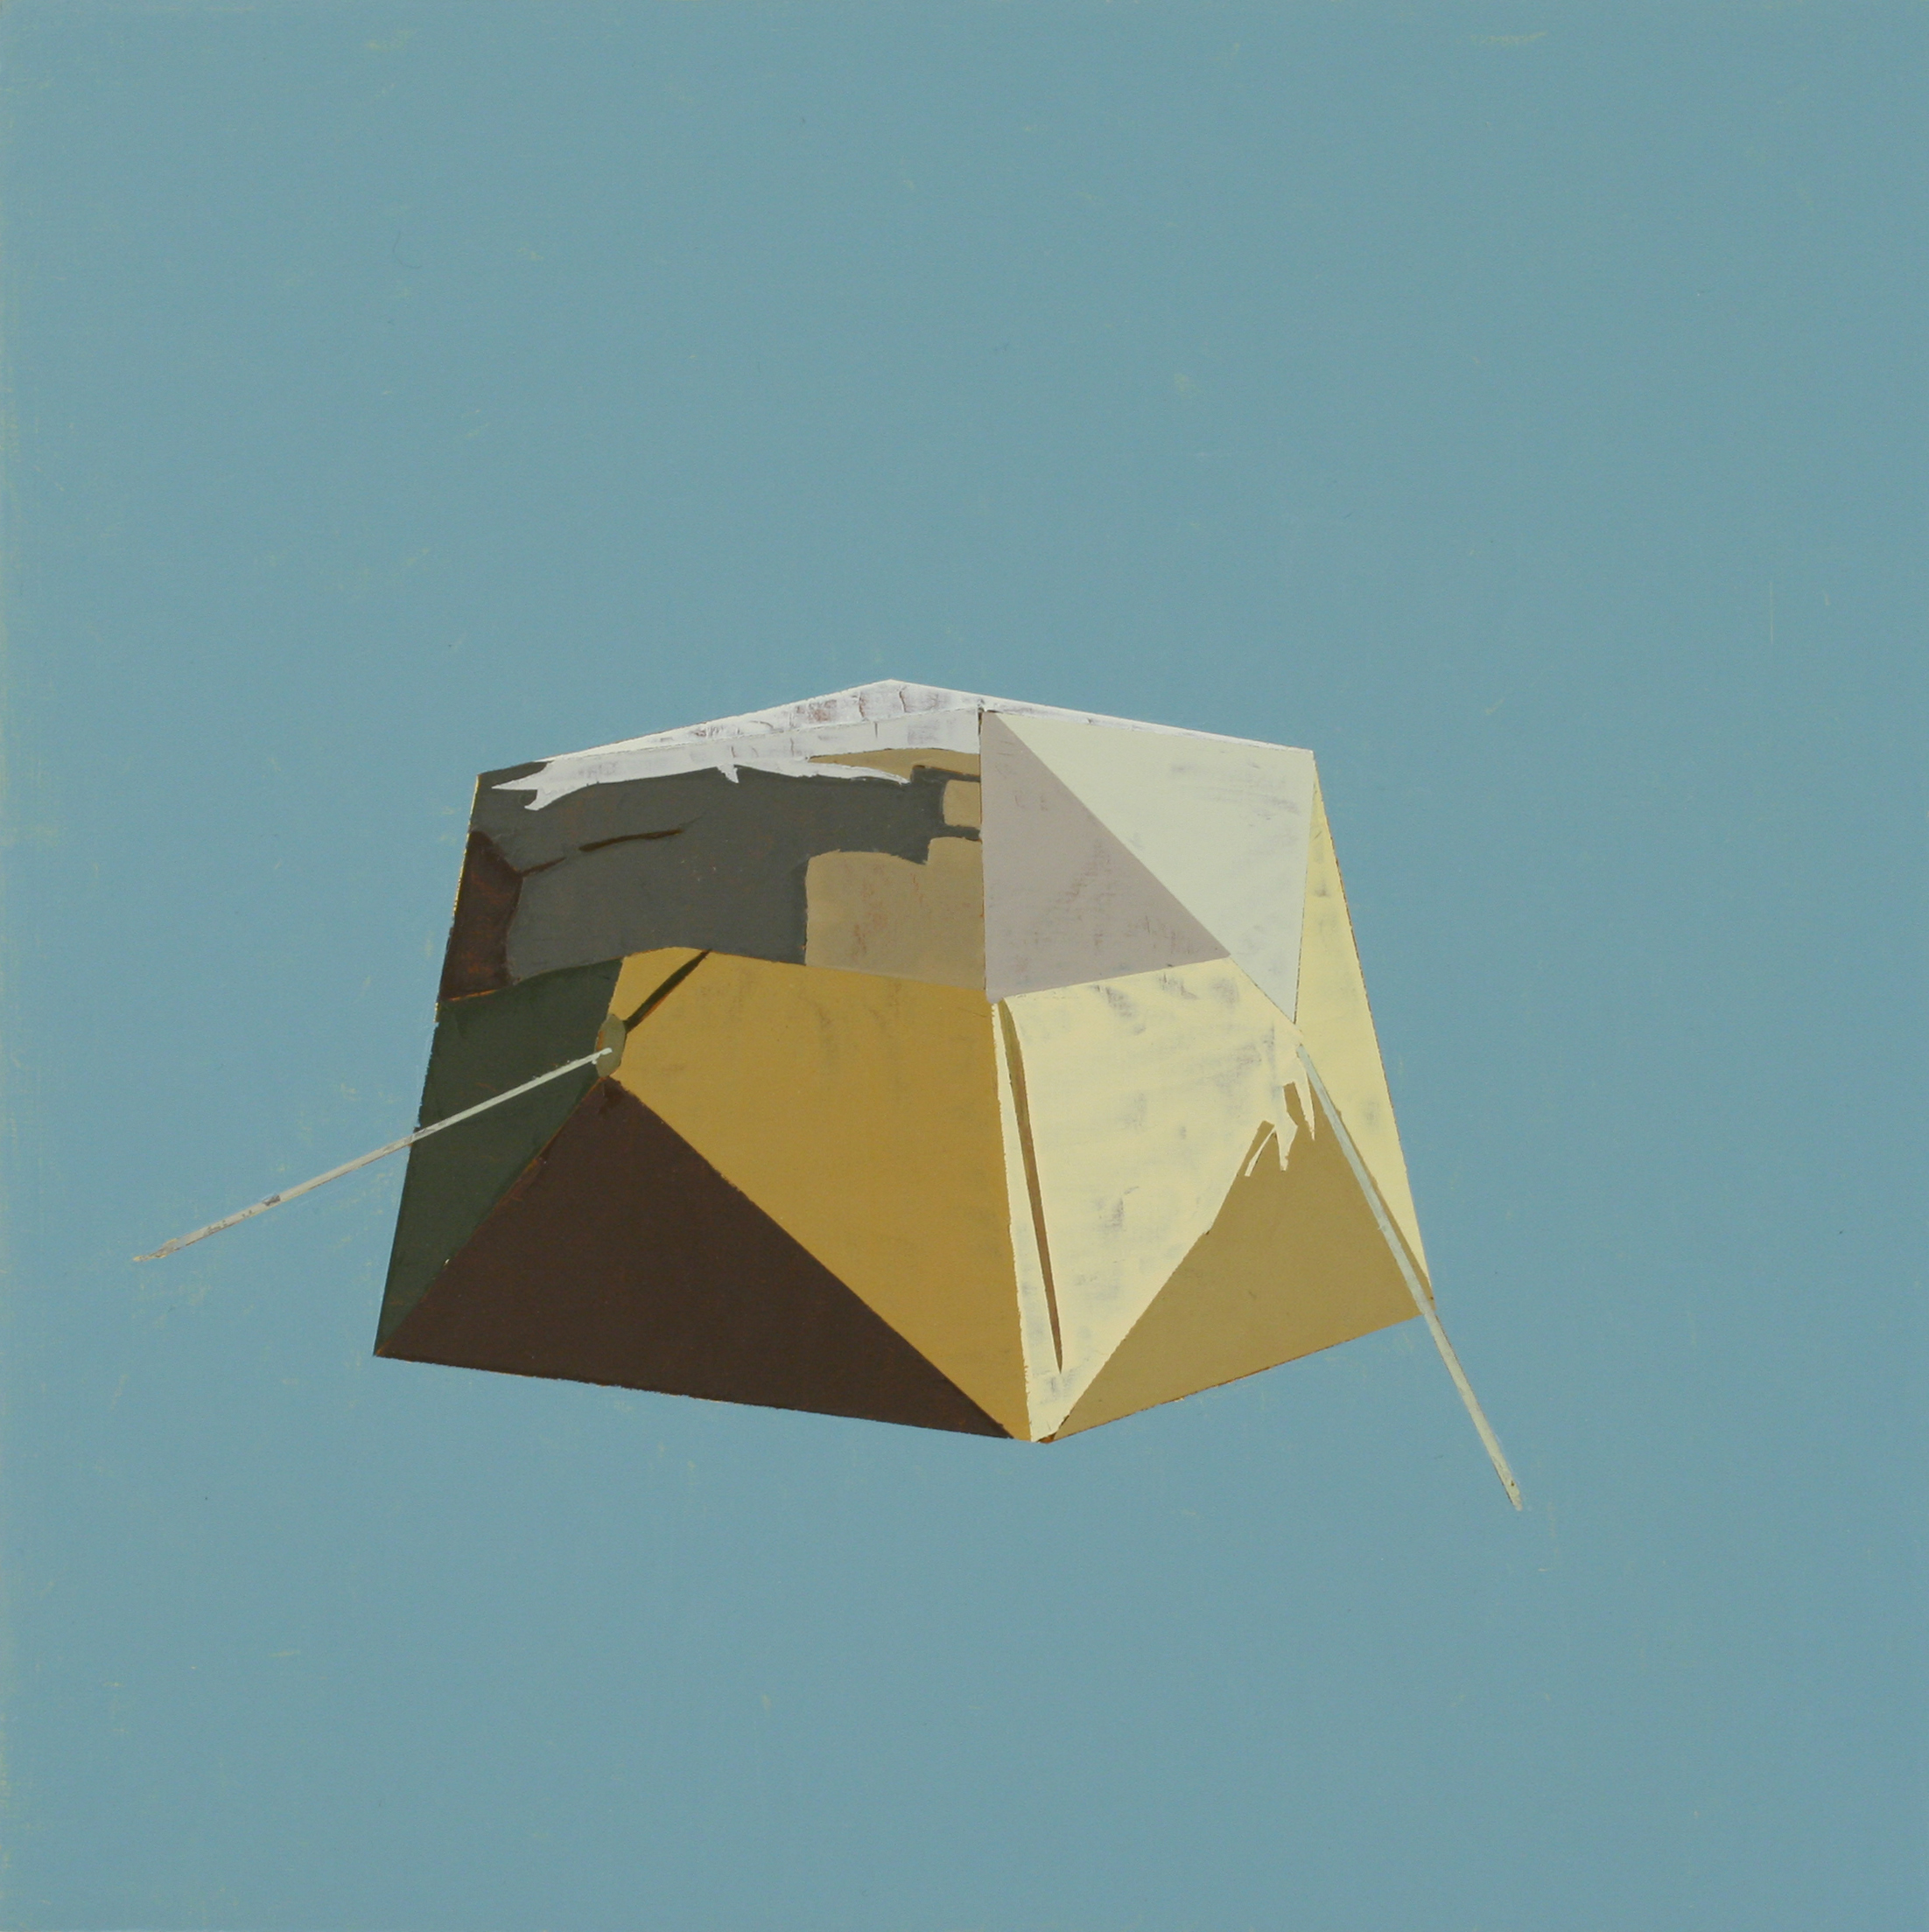   UTILITY TENT IN CELESTIAL BLUE   oil on panel | 12" x 12" | 2010 